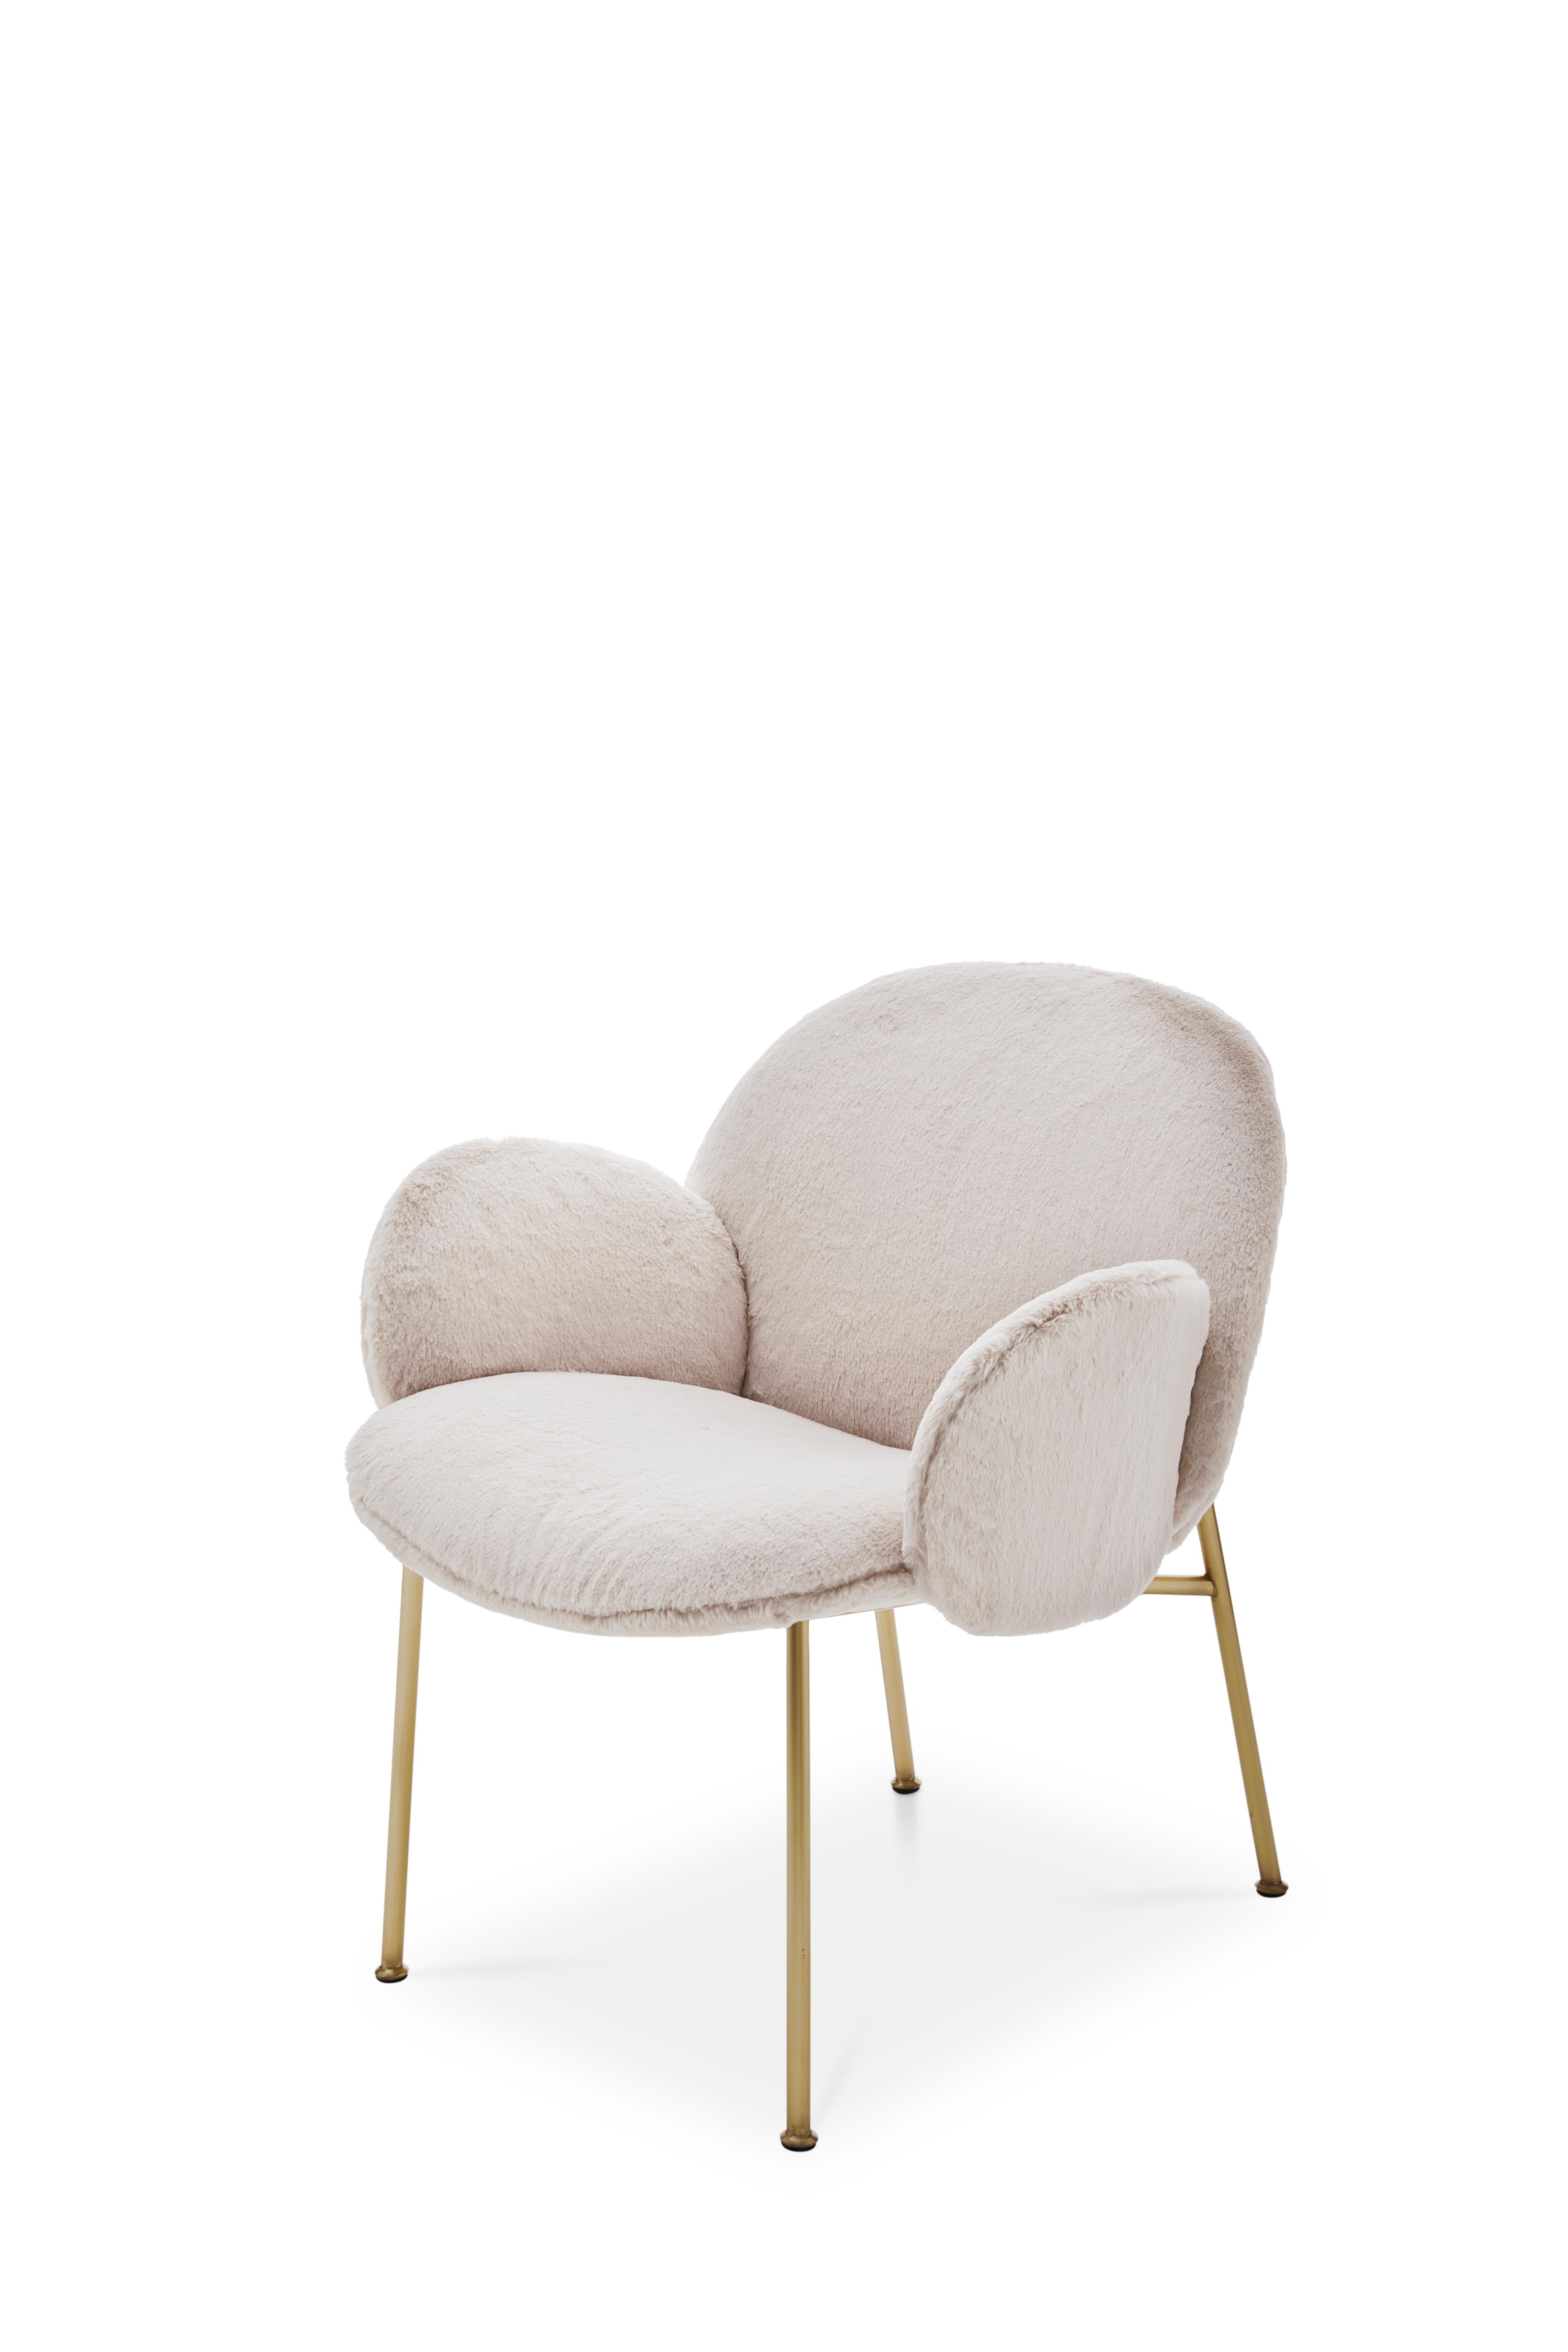 Ola originates from a simple idea but at the same time represents a complex concept – a welcoming arm chair created utilising four individual curved sheets. Each sheet converges towards a single centre. Four sheets become two sheets for the